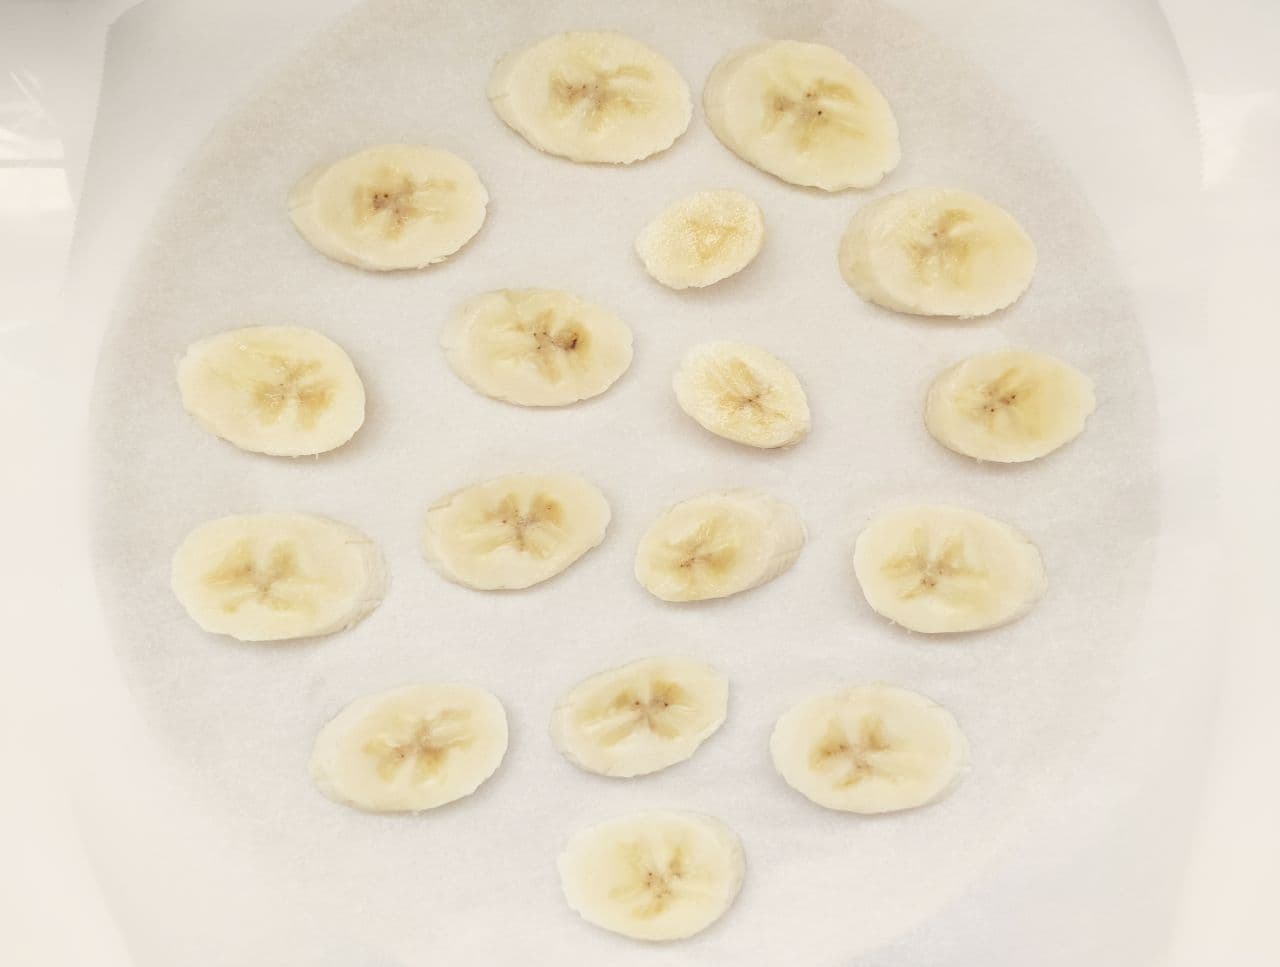 Recipe for "Easy Dried Bananas" in the microwave